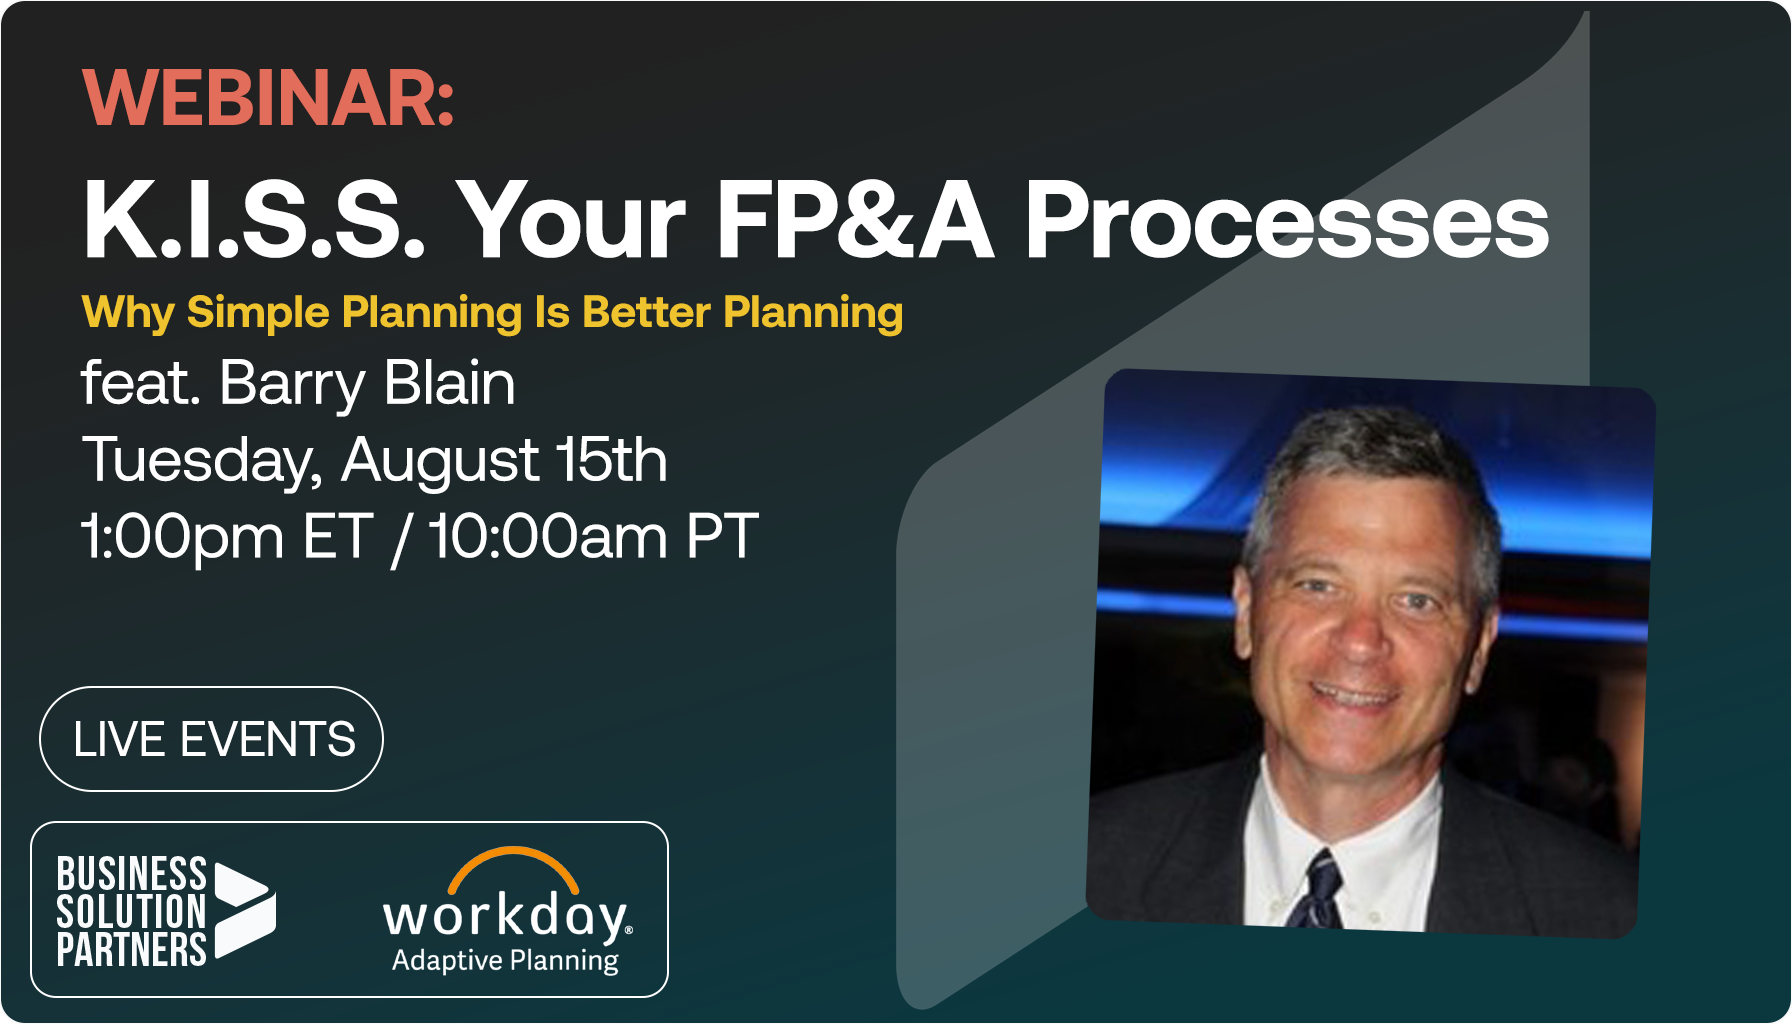 Webinar: K.I.S.S. Your FP&A - Why Simple Planning is Better Planning